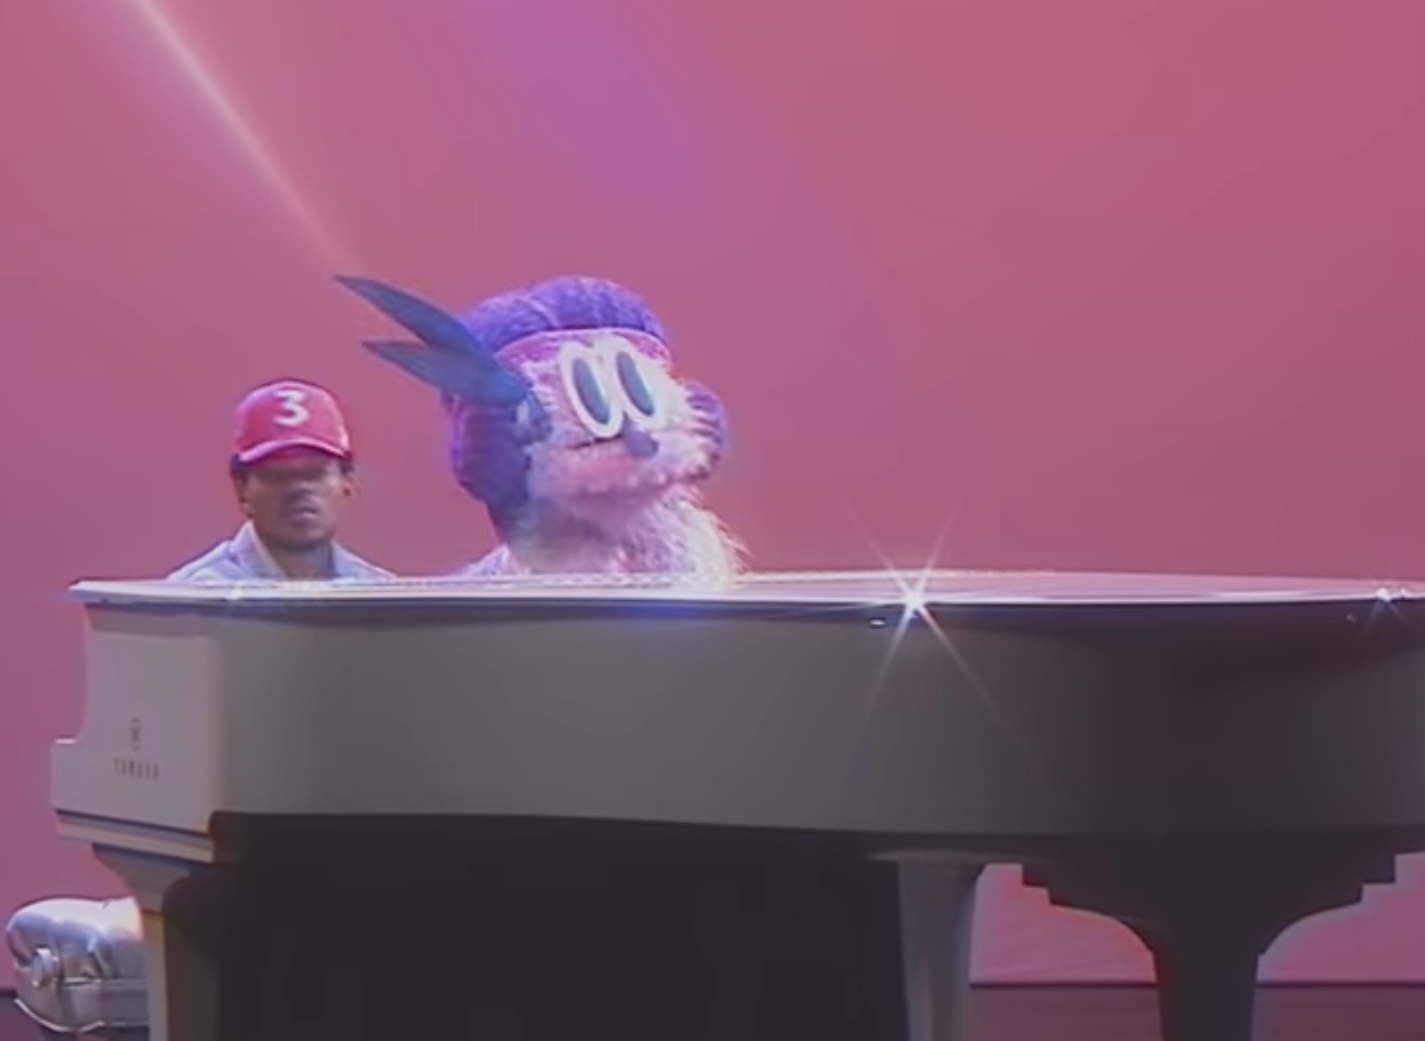 Chance the Rapper, 'Same Drugs' screenshot. Photo by Chance the Rapper / YouTube